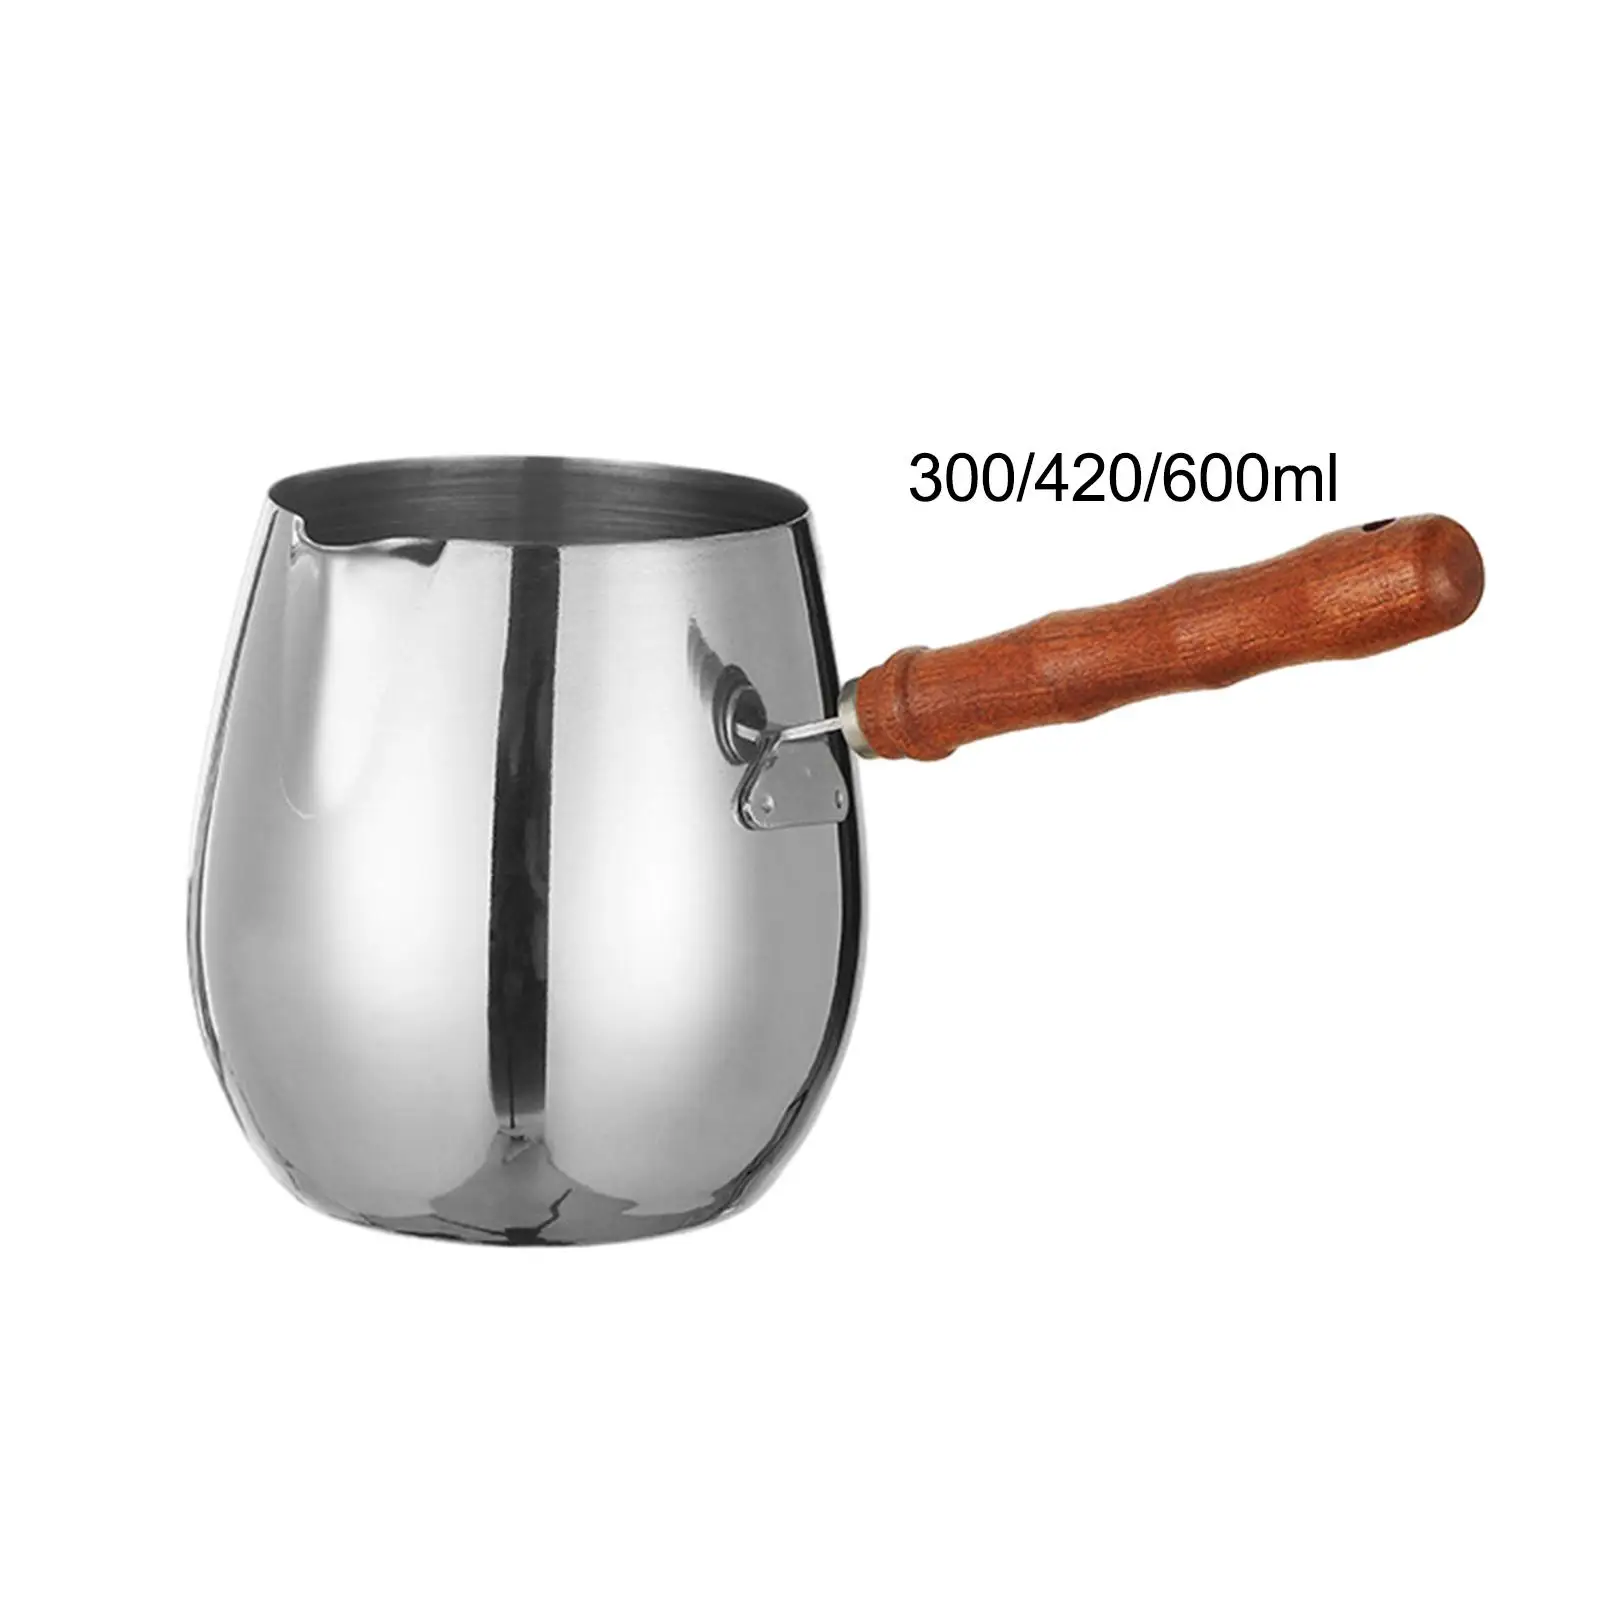 Turkish Coffee Pot Convenient to Use Wooden Handle Chocolate Melting Pan